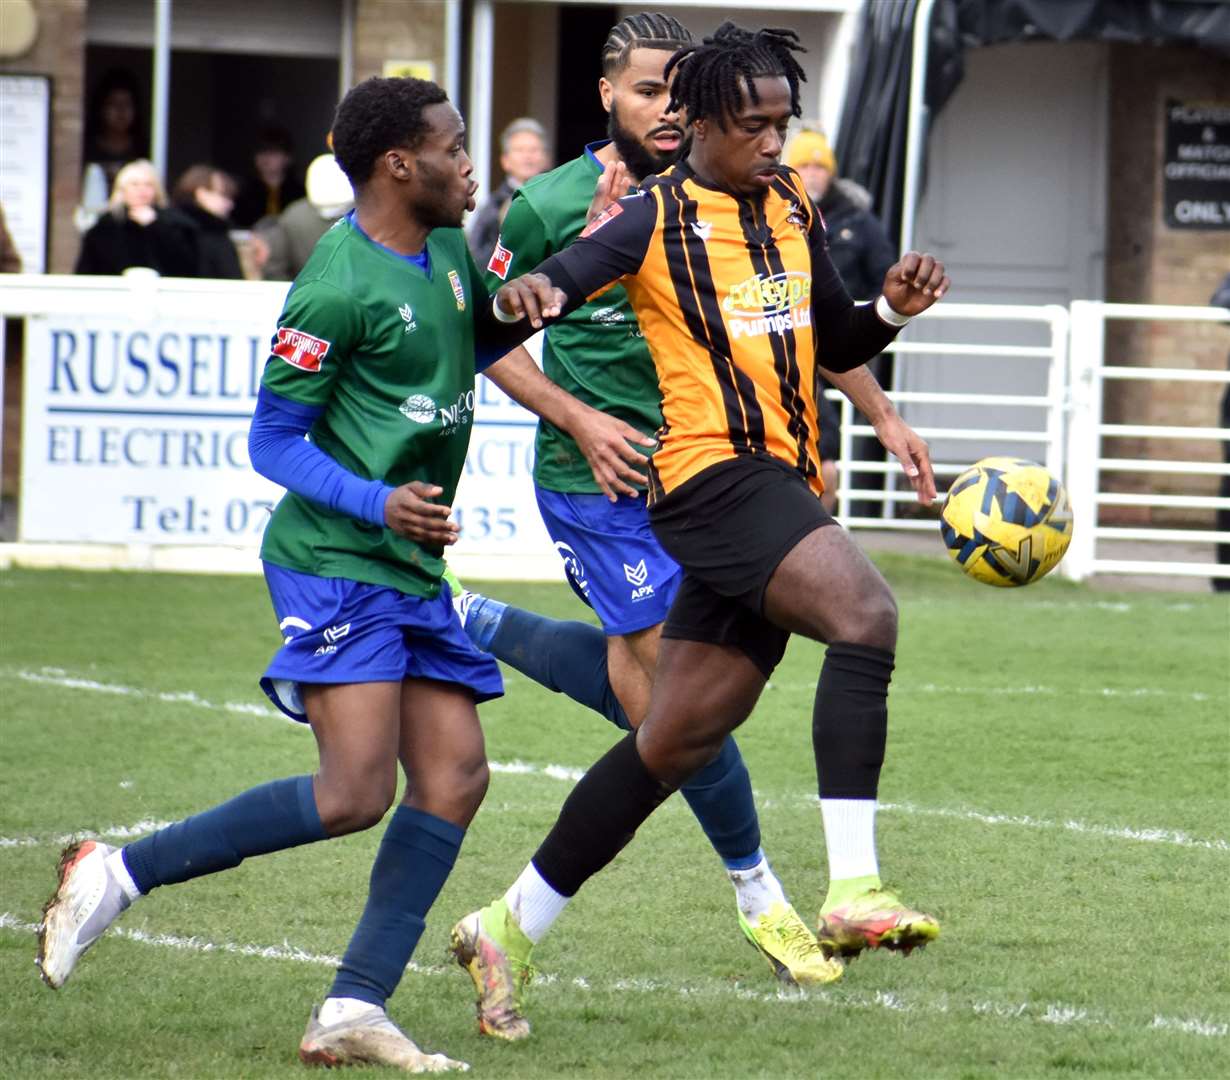 Scorer Ira Jackson during Folkestone's 3-1 defeat at home to Kingstonian on Saturday. Picture: Randolph File